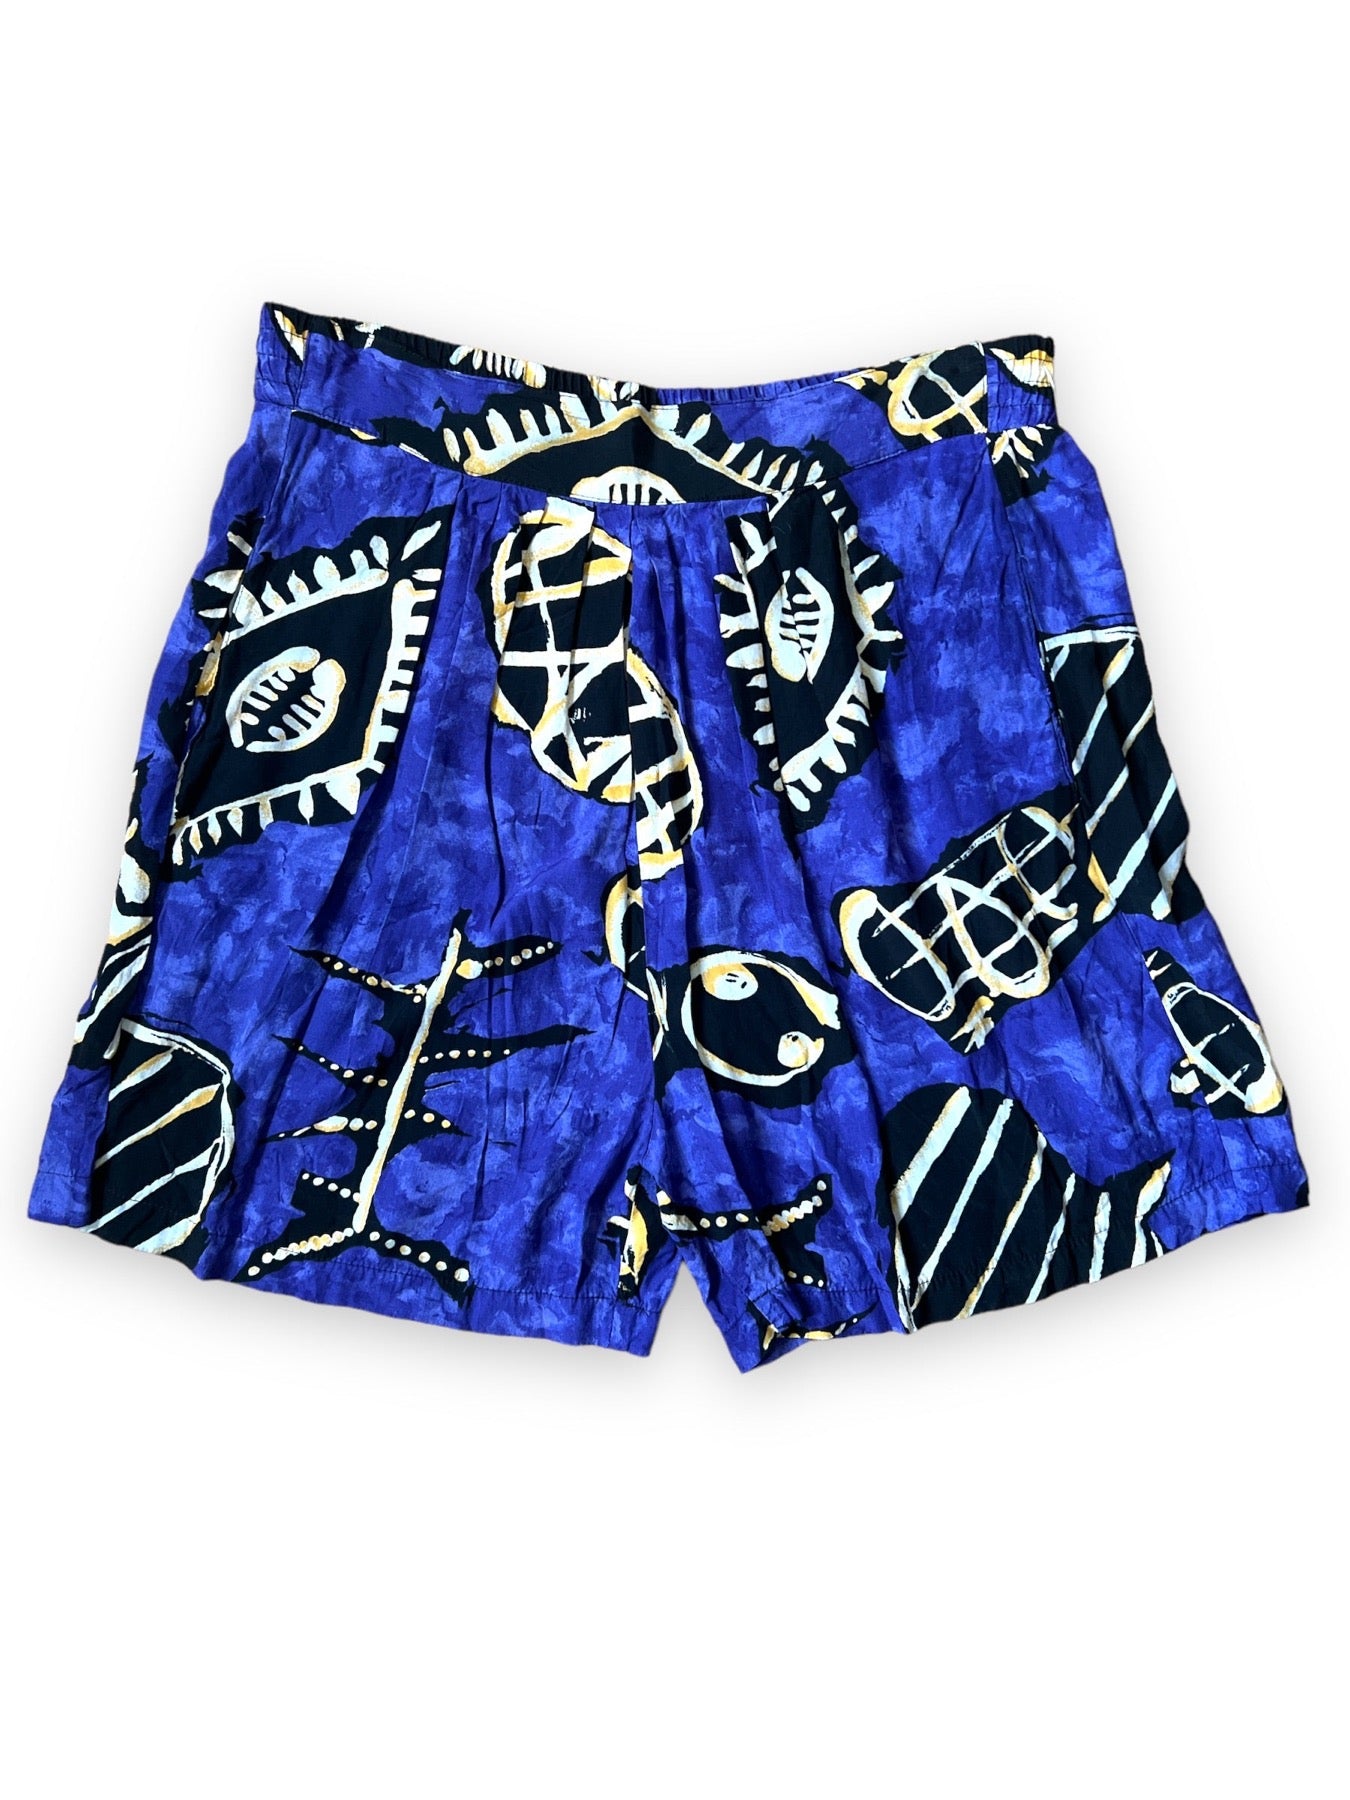 CLIO PURPLE ABSTRACT SHORTS